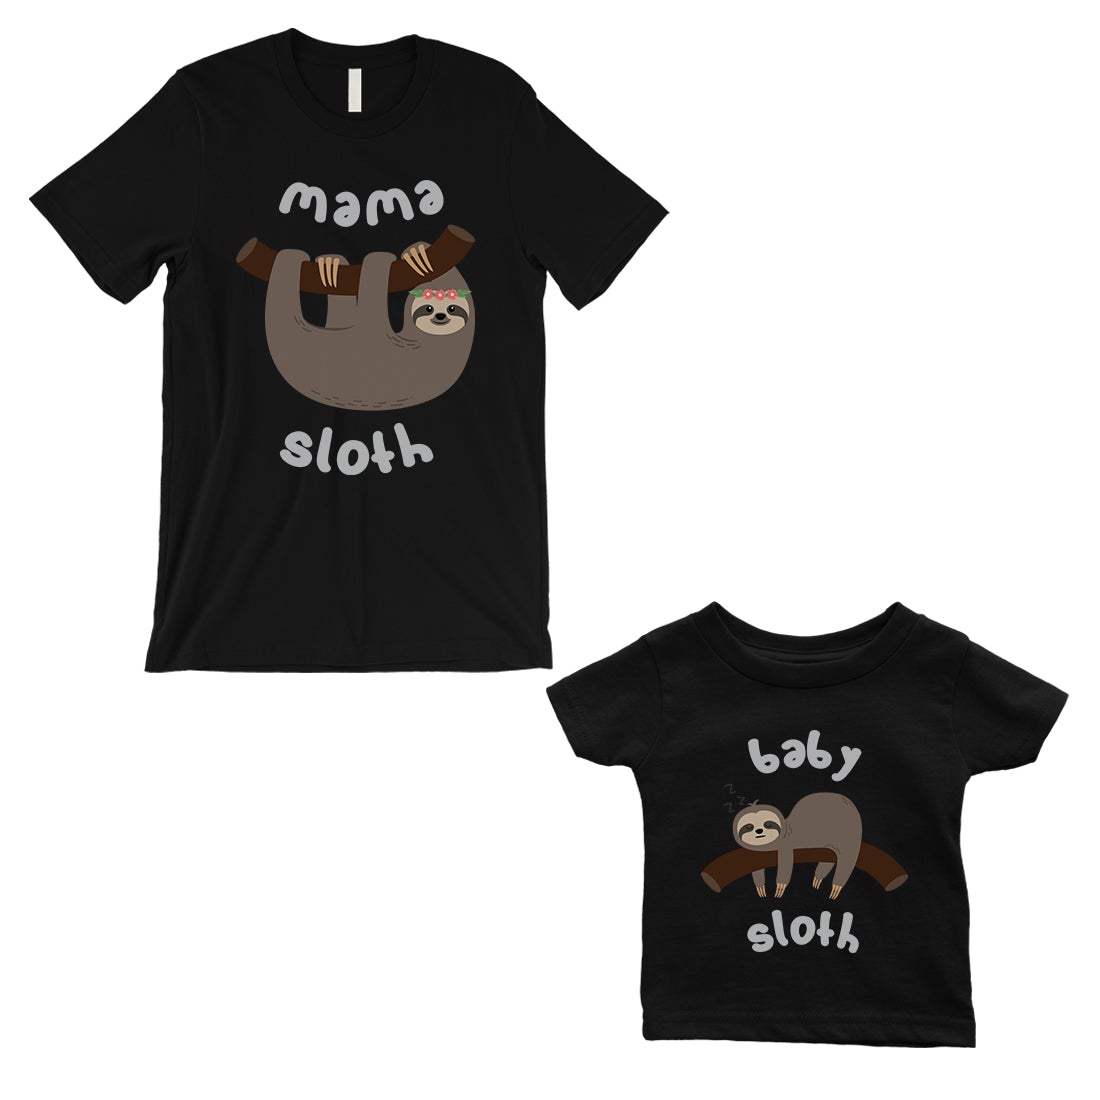 Mama Baby Sloth Mom and Baby Matching T-Shirts Black Mother's Day Black